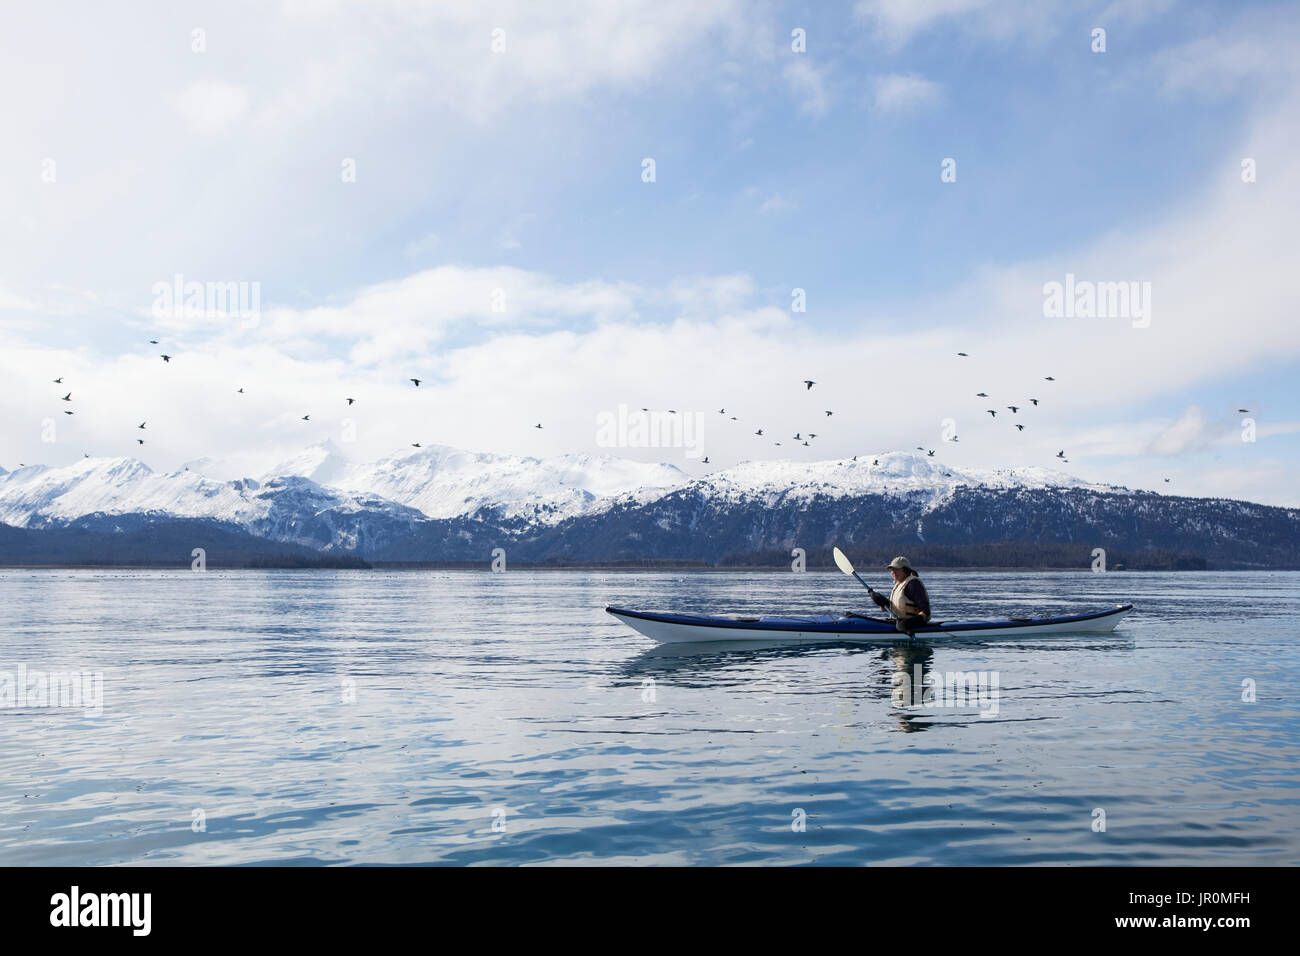 Paddling In A Canoe On Tranquil Water With A Flock Of Birds Flying Overhead And A View Of The Snow Capped Kenai Mountains, Kachemak Bay State Park Stock Photo